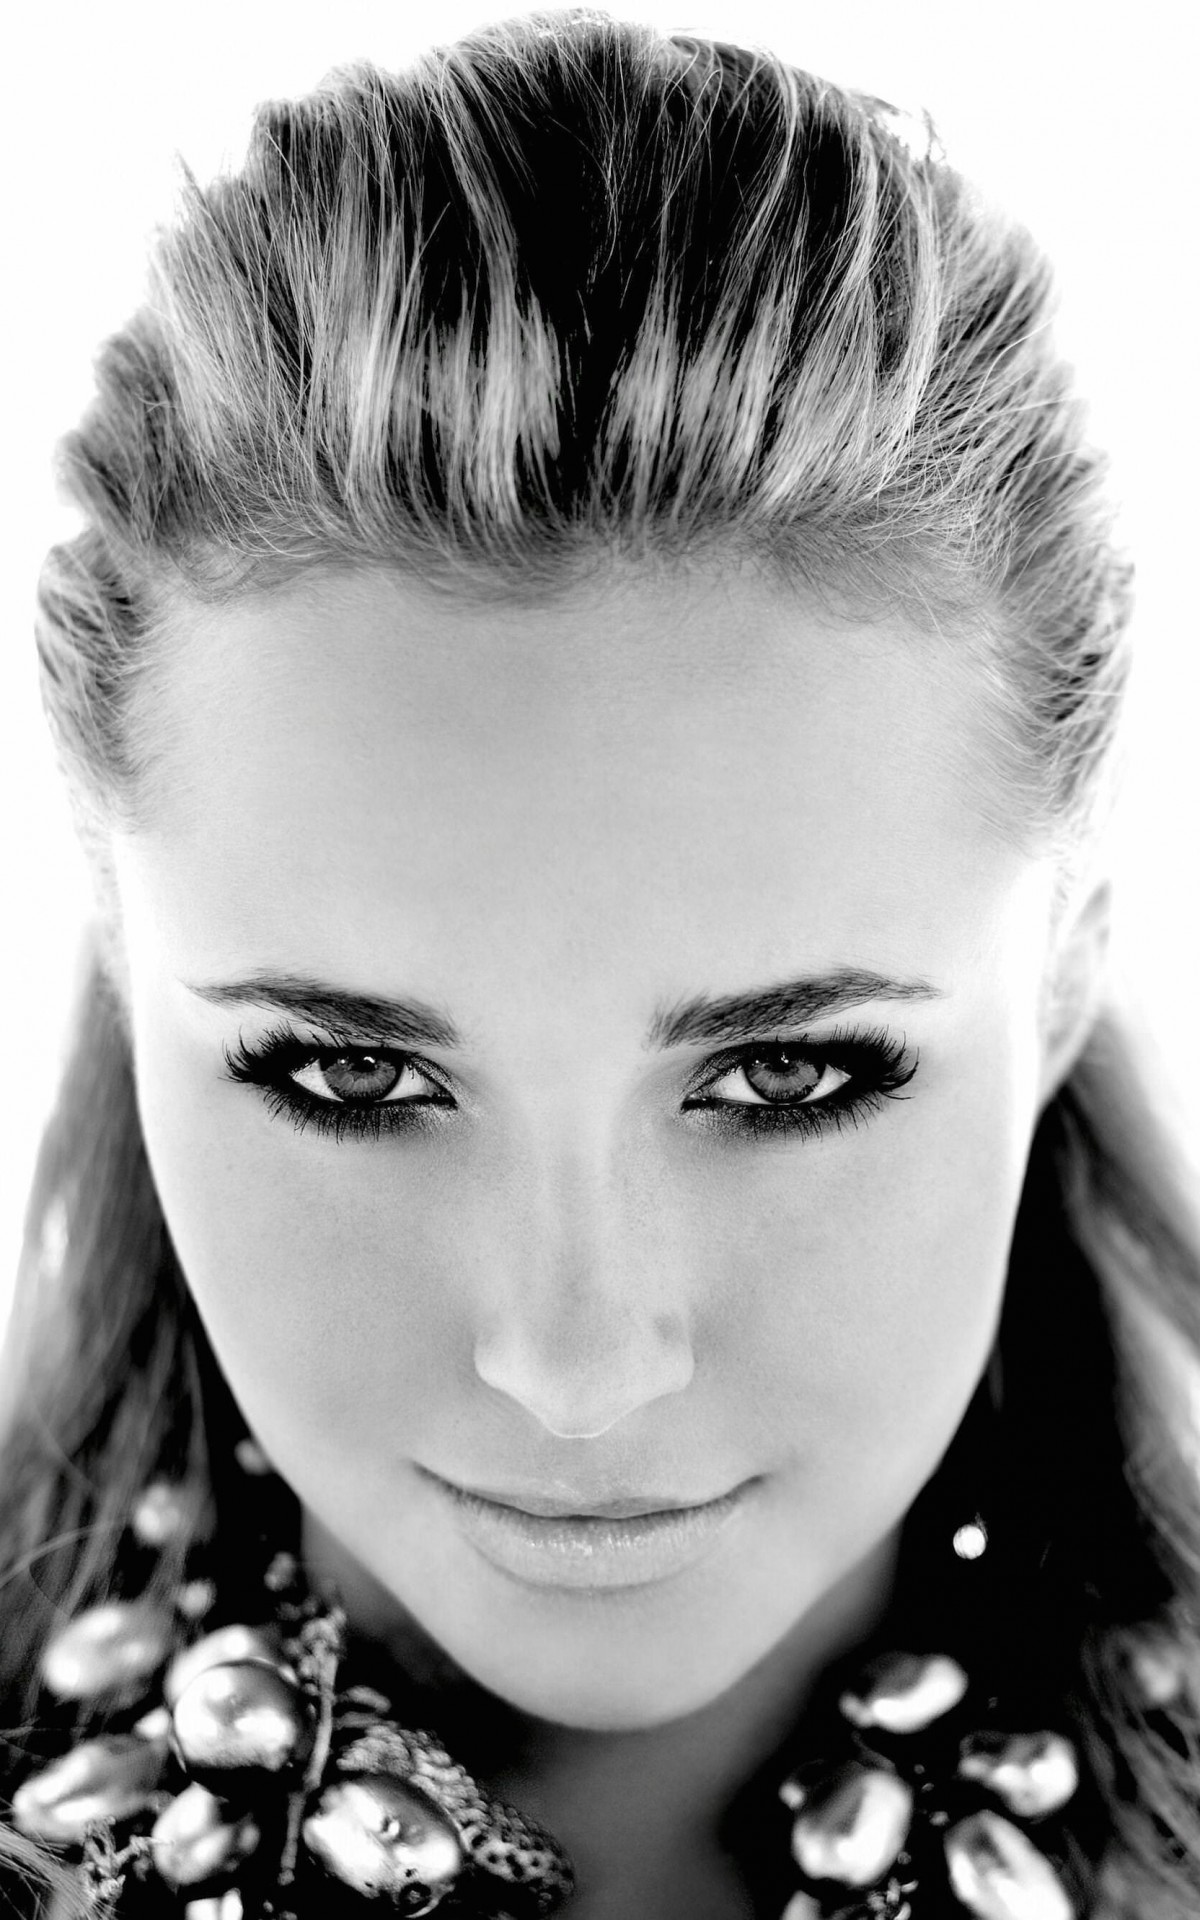 Hayden Panettiere In Black & White Wallpaper for Amazon Kindle Fire HDX